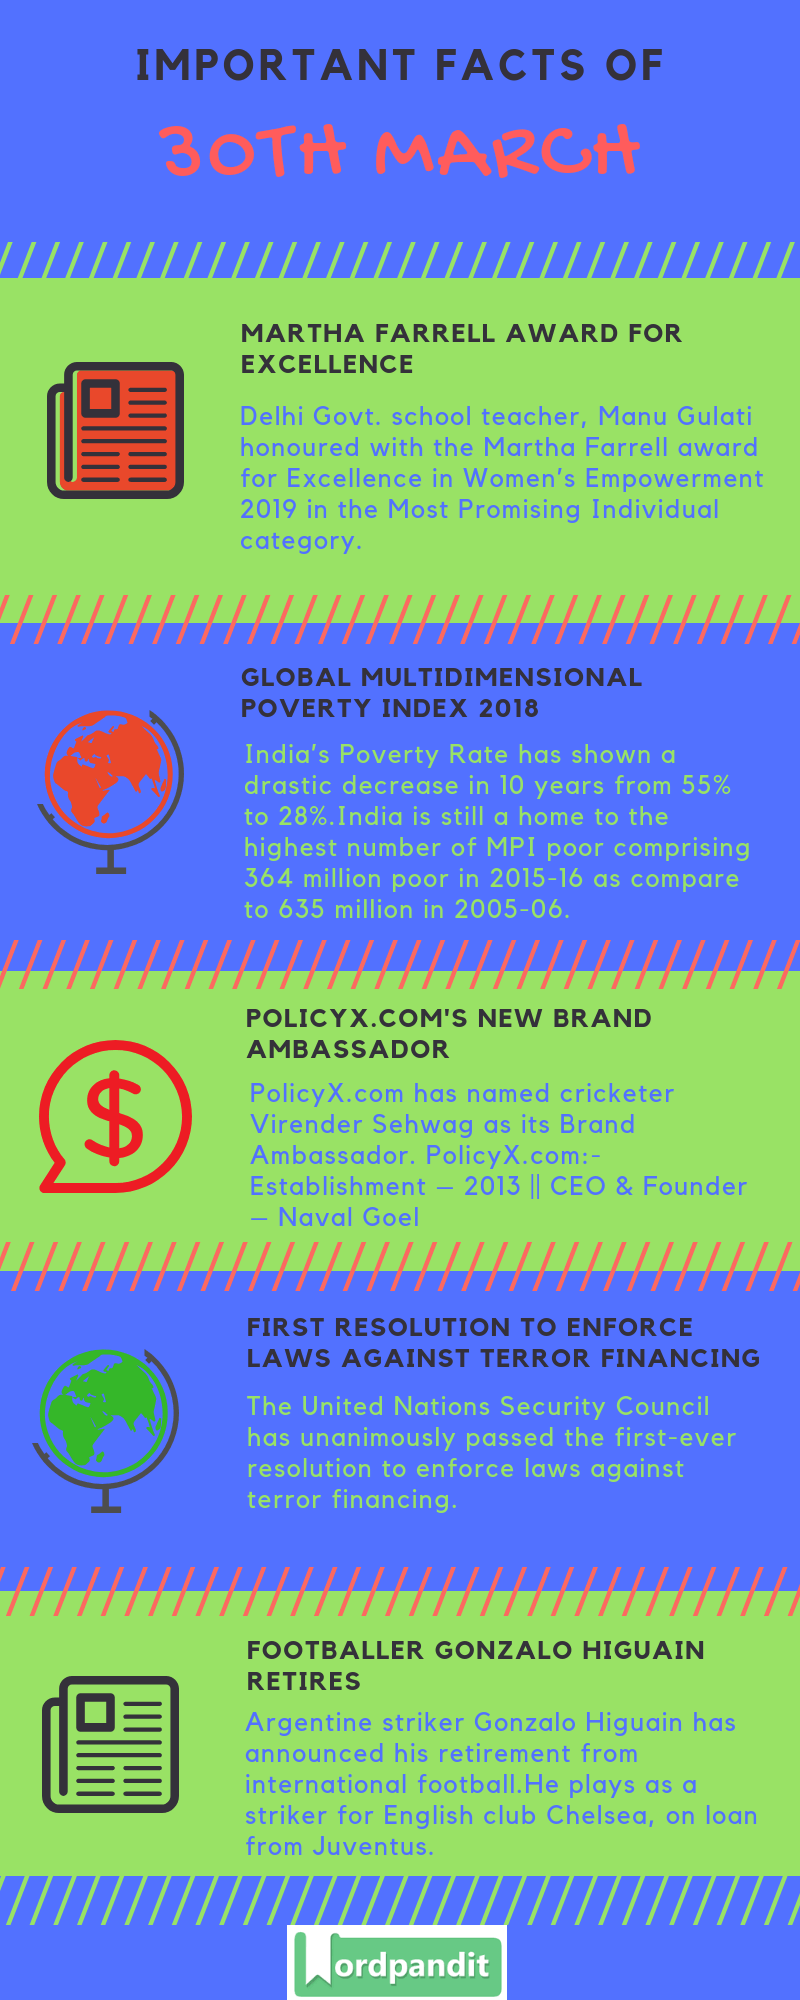 Daily Current Affairs 30 March 2019 Current Affairs Quiz 30 March 2019 Current Affairs Infographic